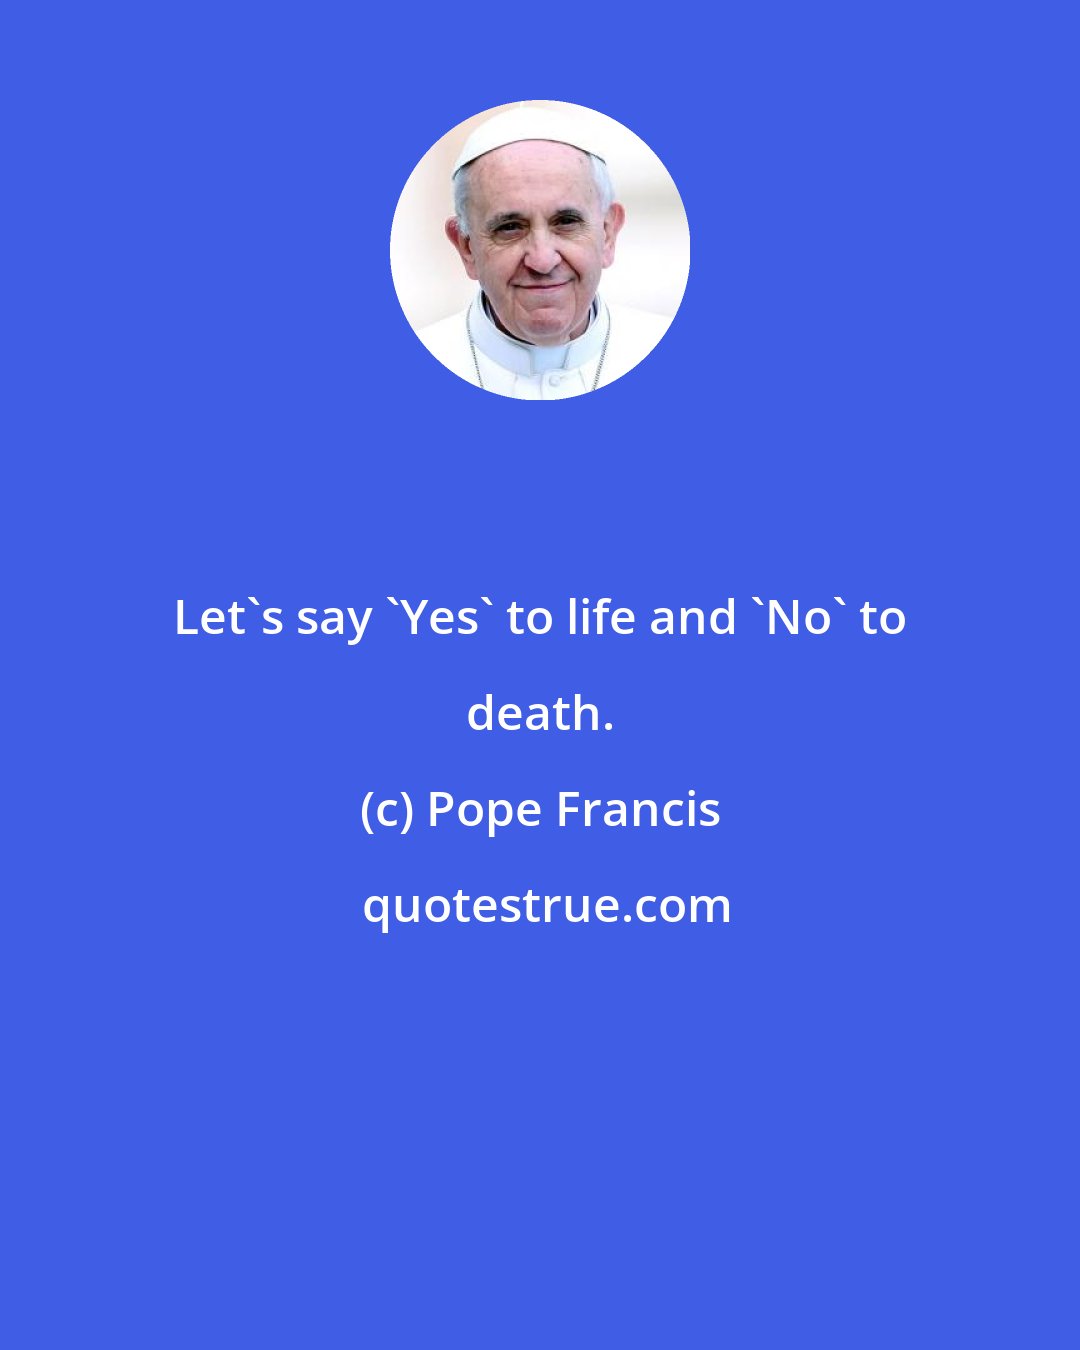 Pope Francis: Let's say 'Yes' to life and 'No' to death.